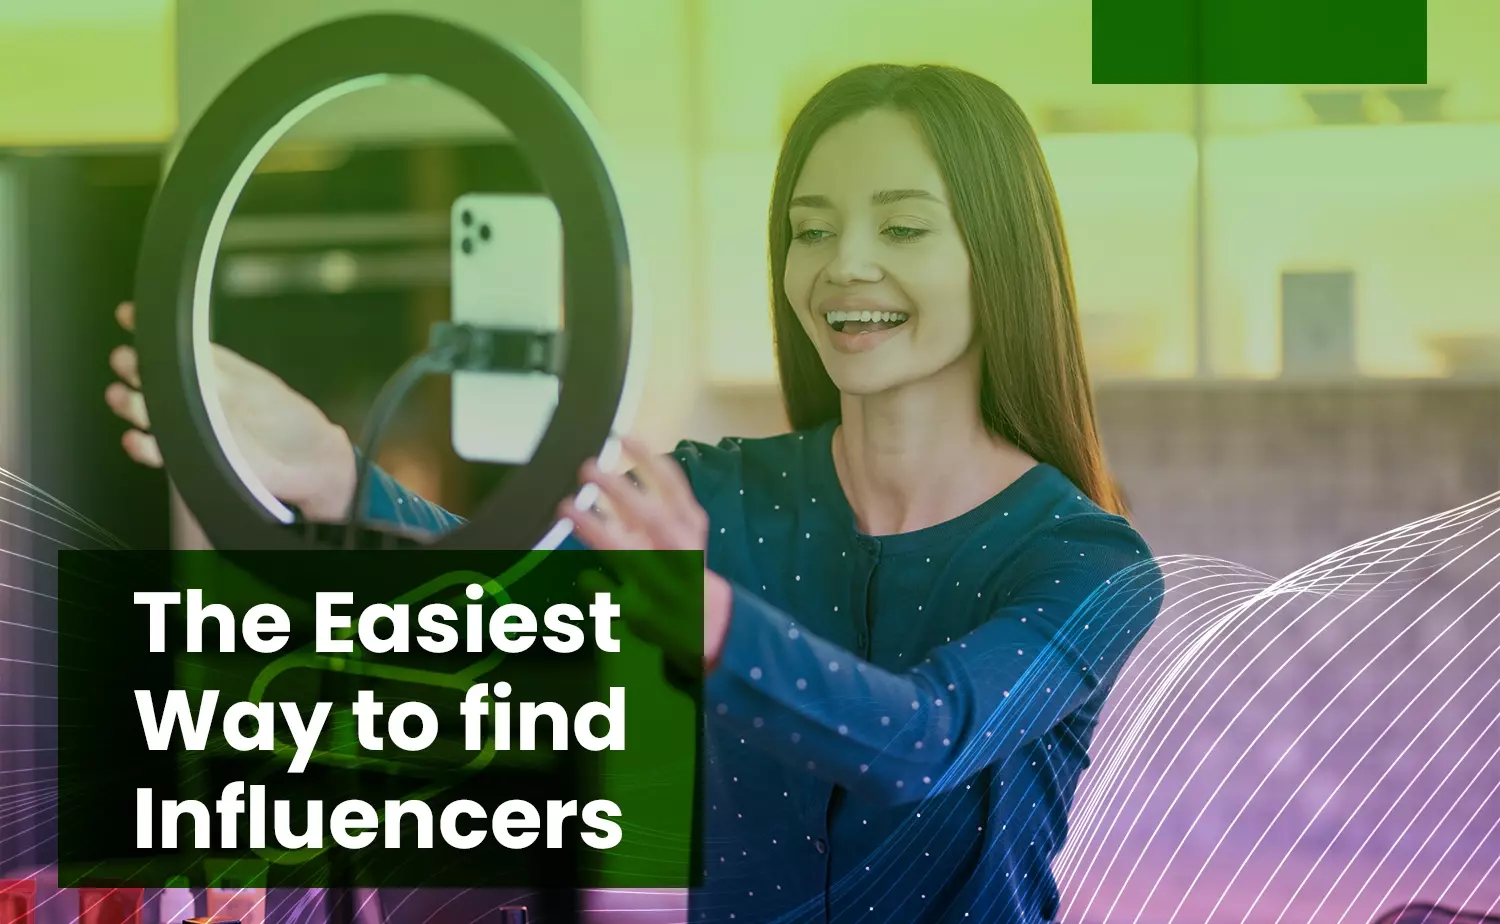 The Easiest Way to find Influencers